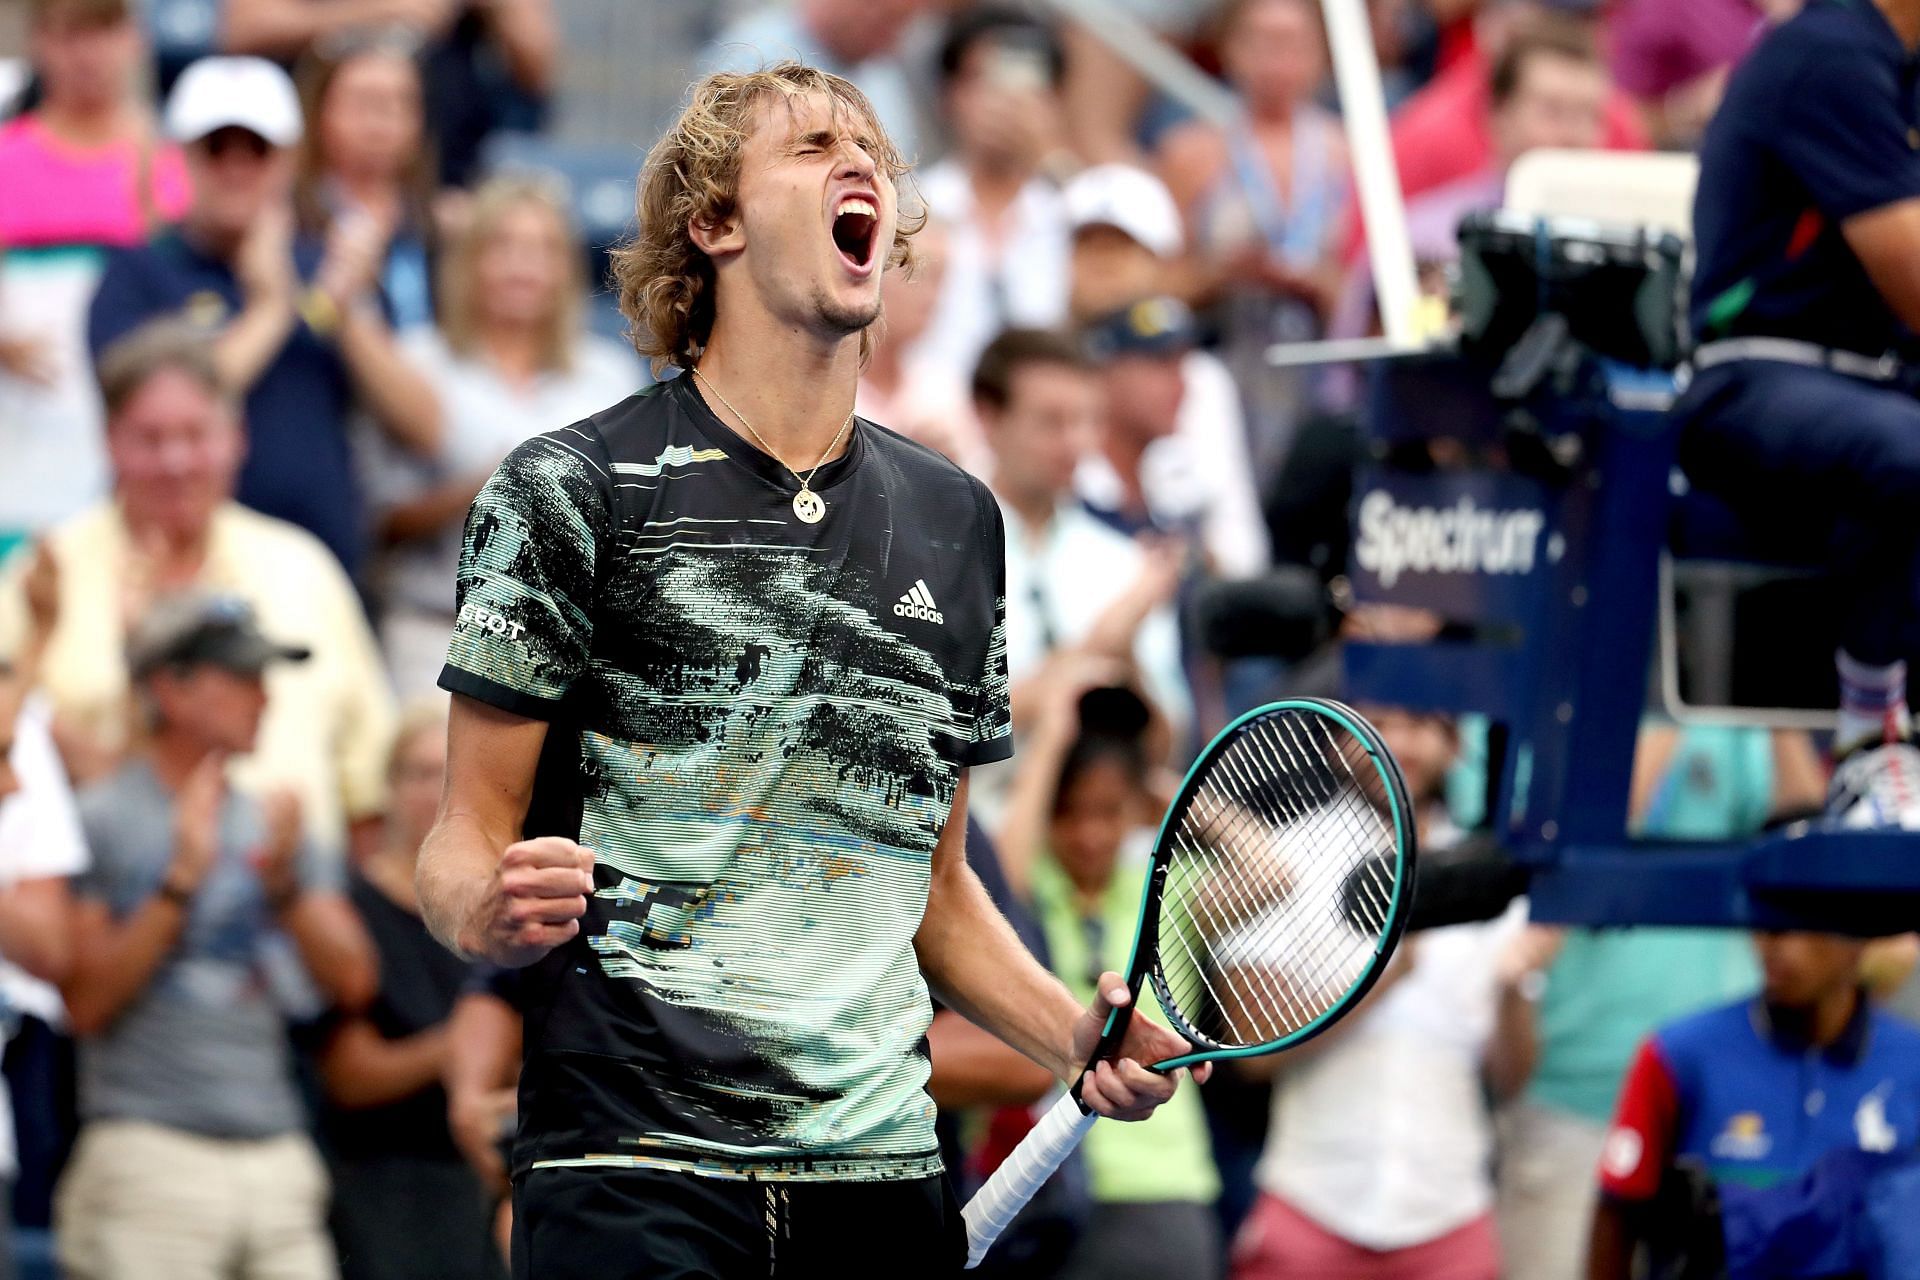 Alexander Zverev plans to return to action at the US Open if possible